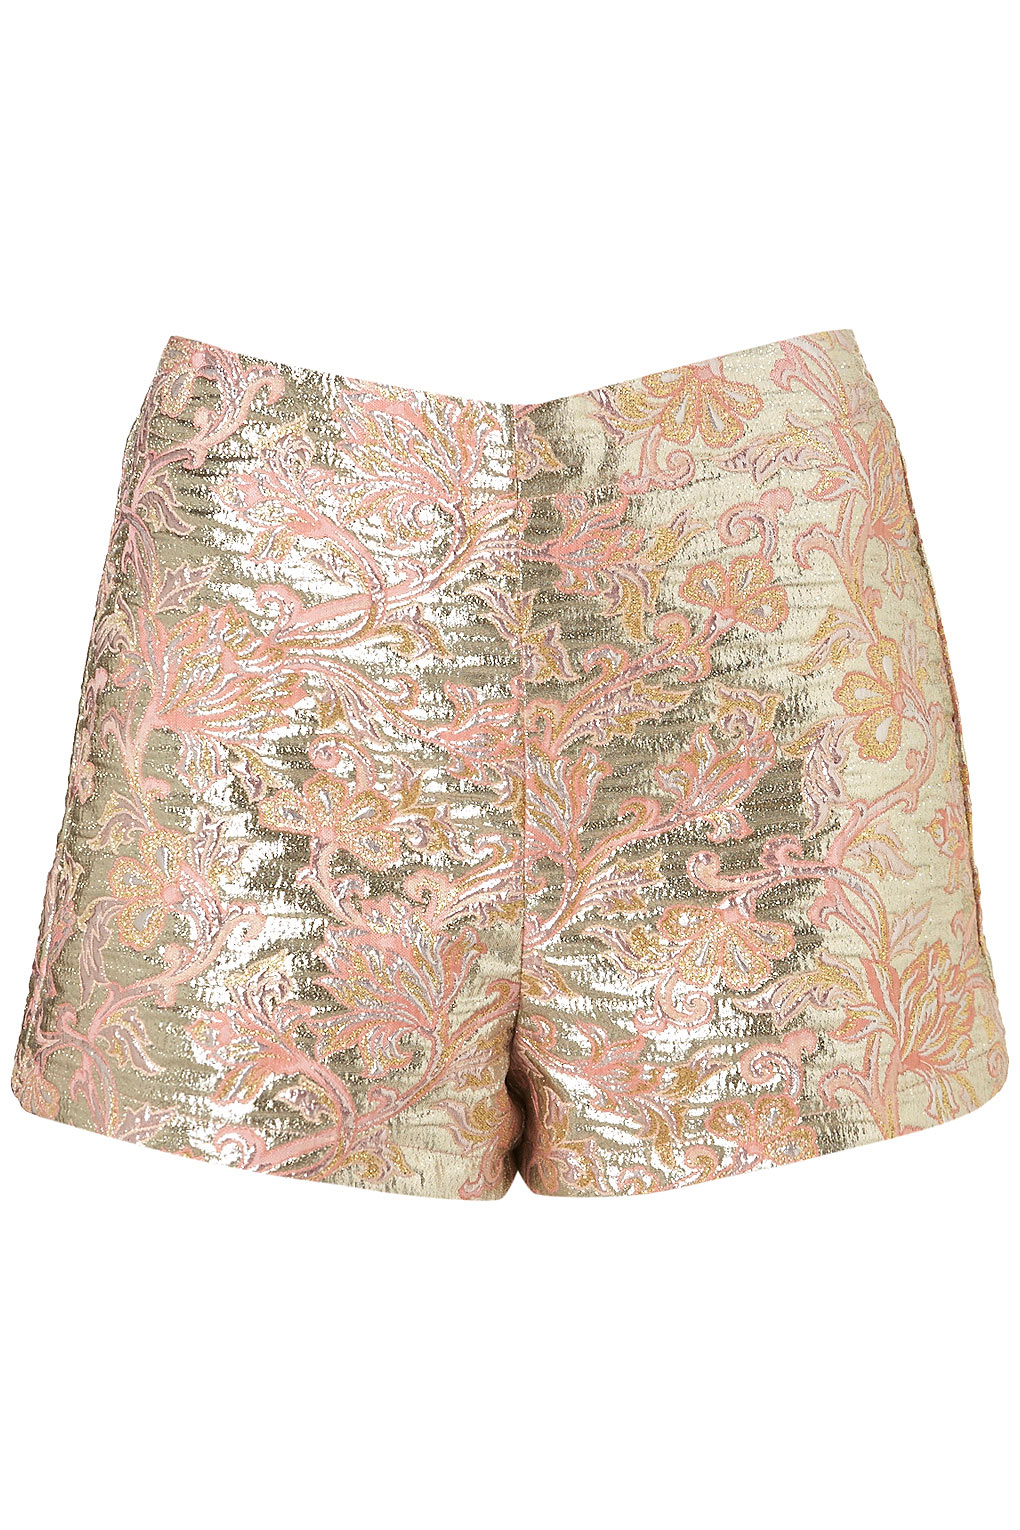 Lyst - Topshop Floral Metallic Pink Shorts in Pink